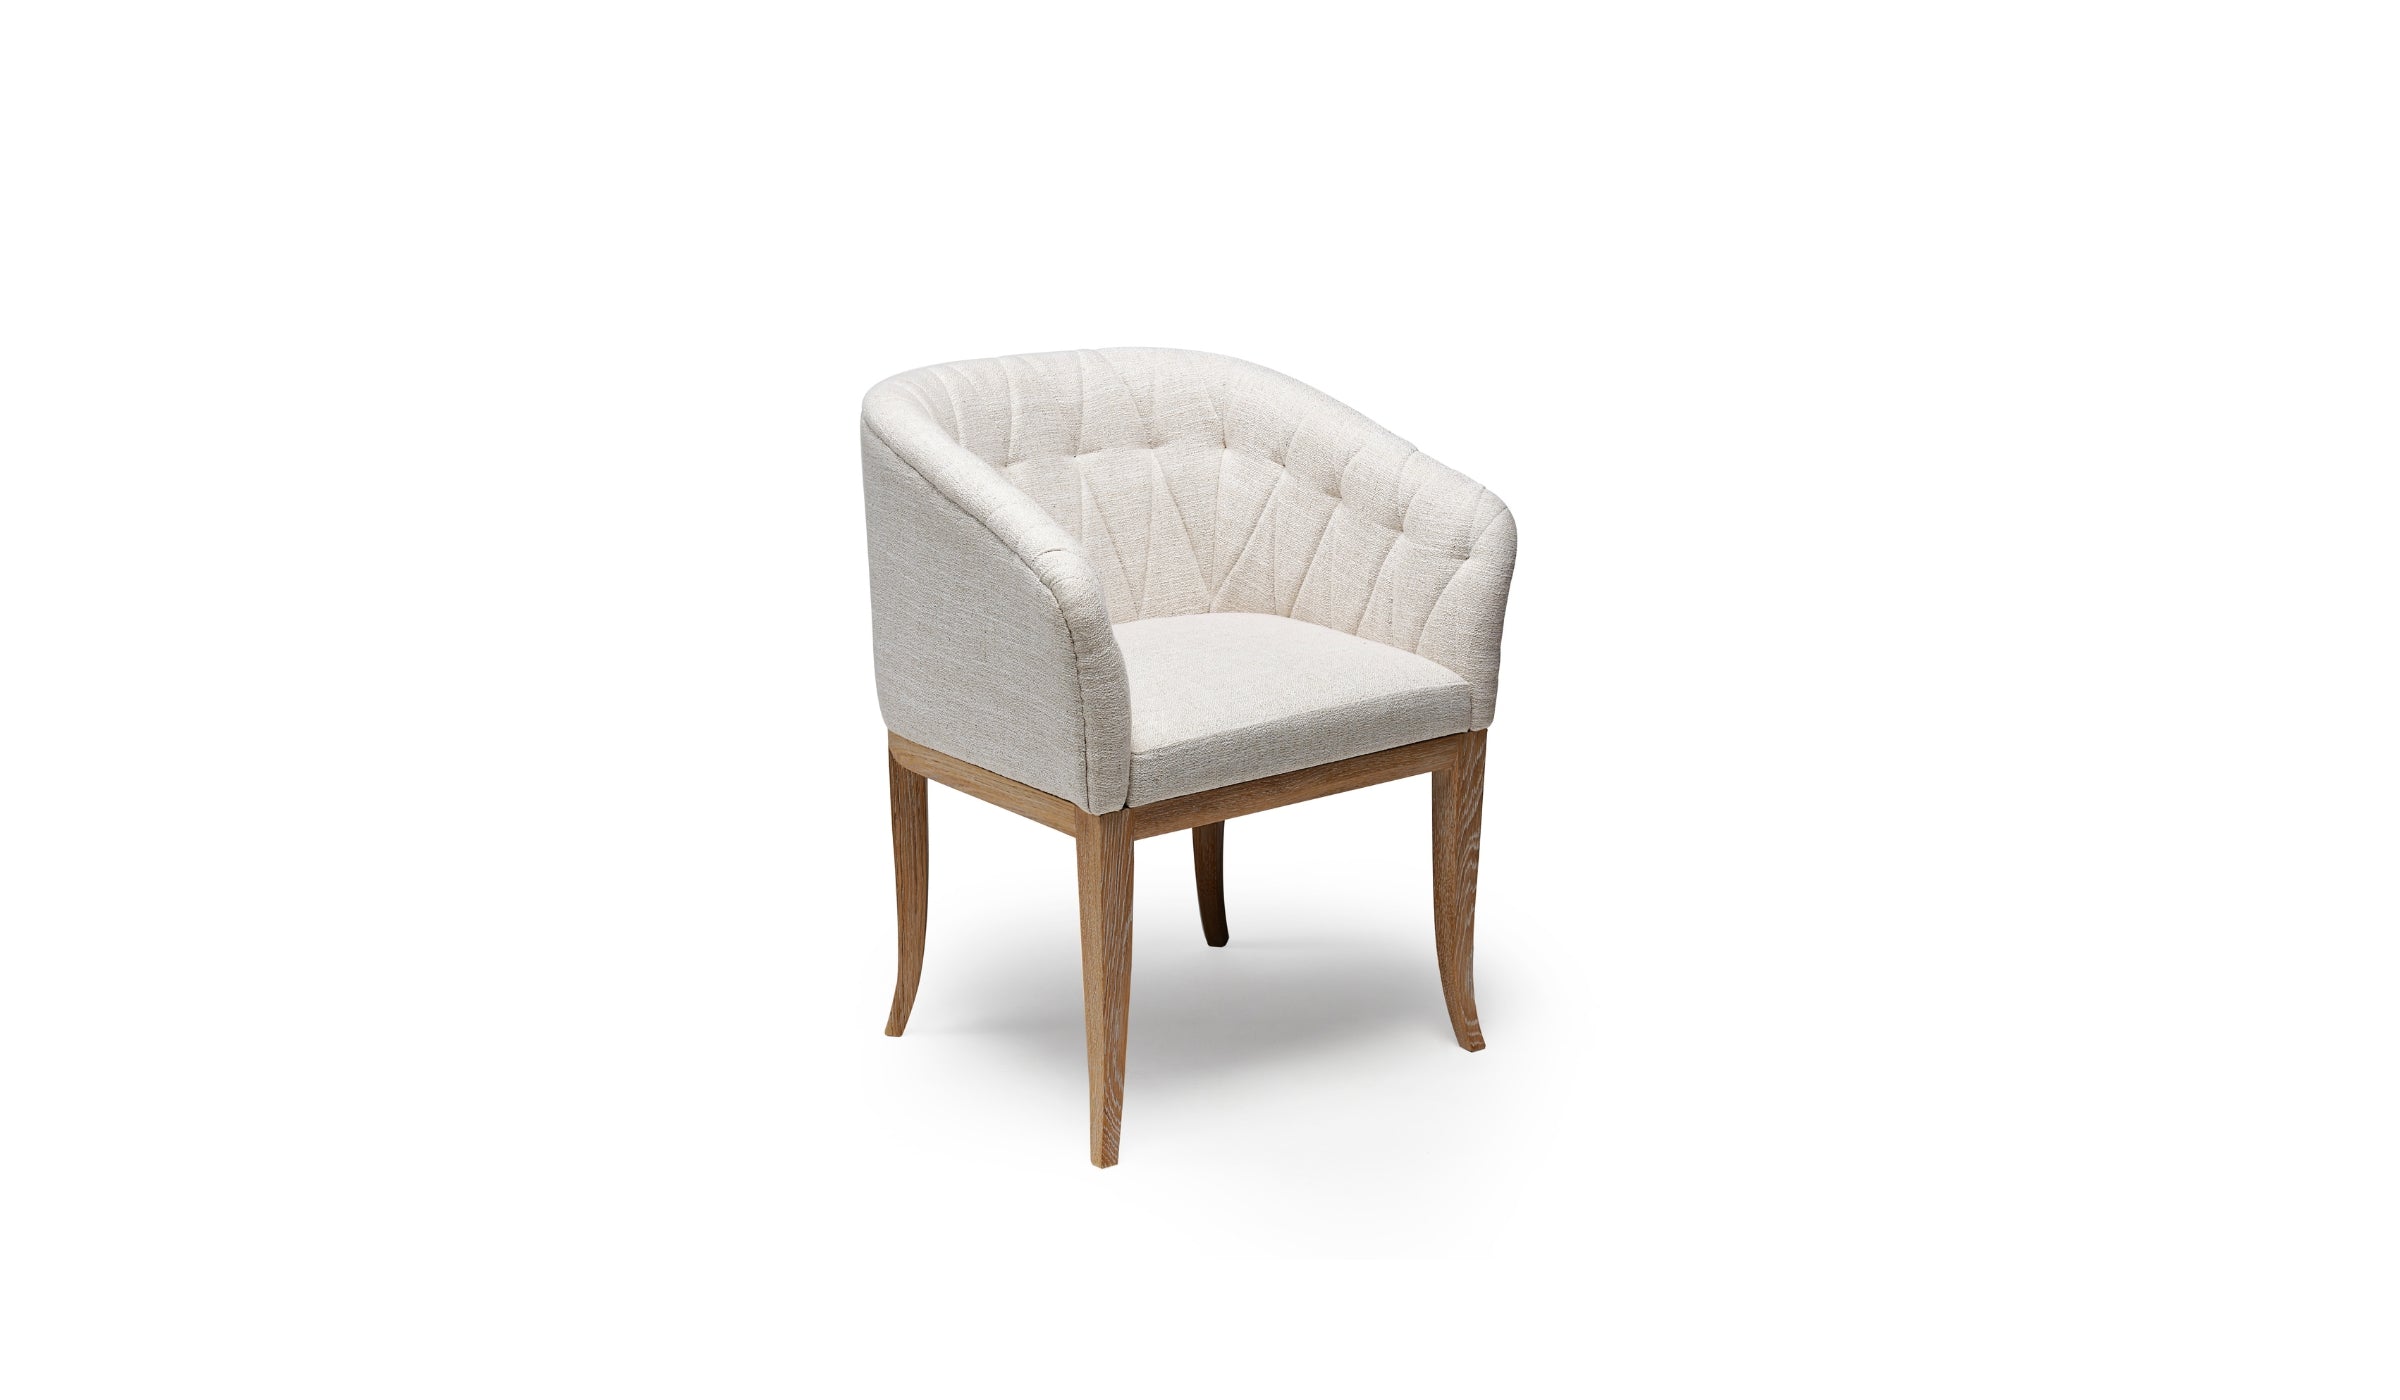 Isabella - Dining chair